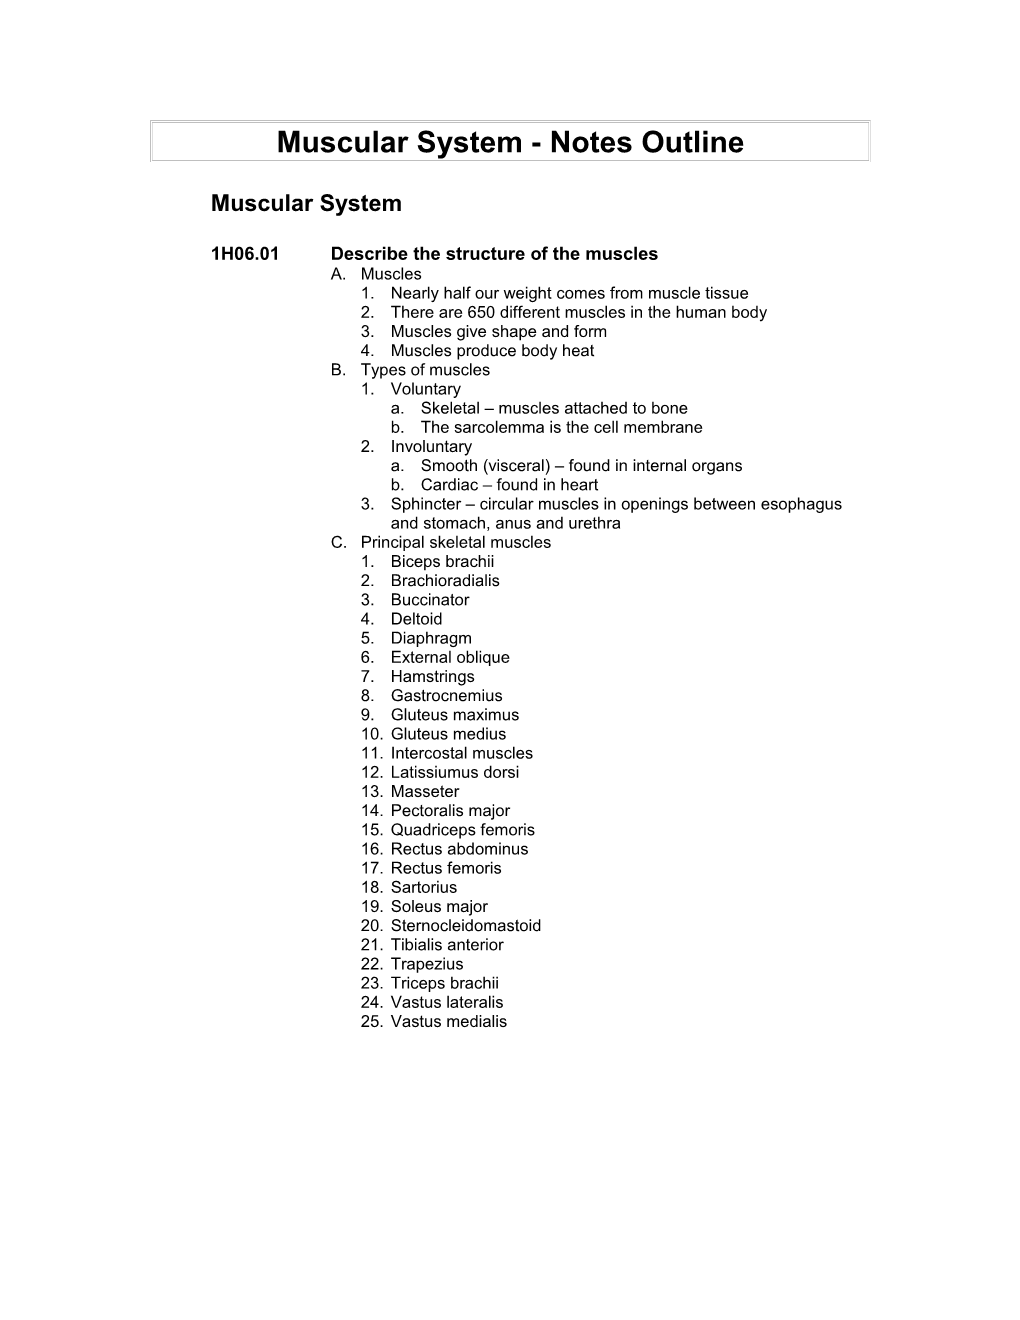 Muscular System - Notes Outline